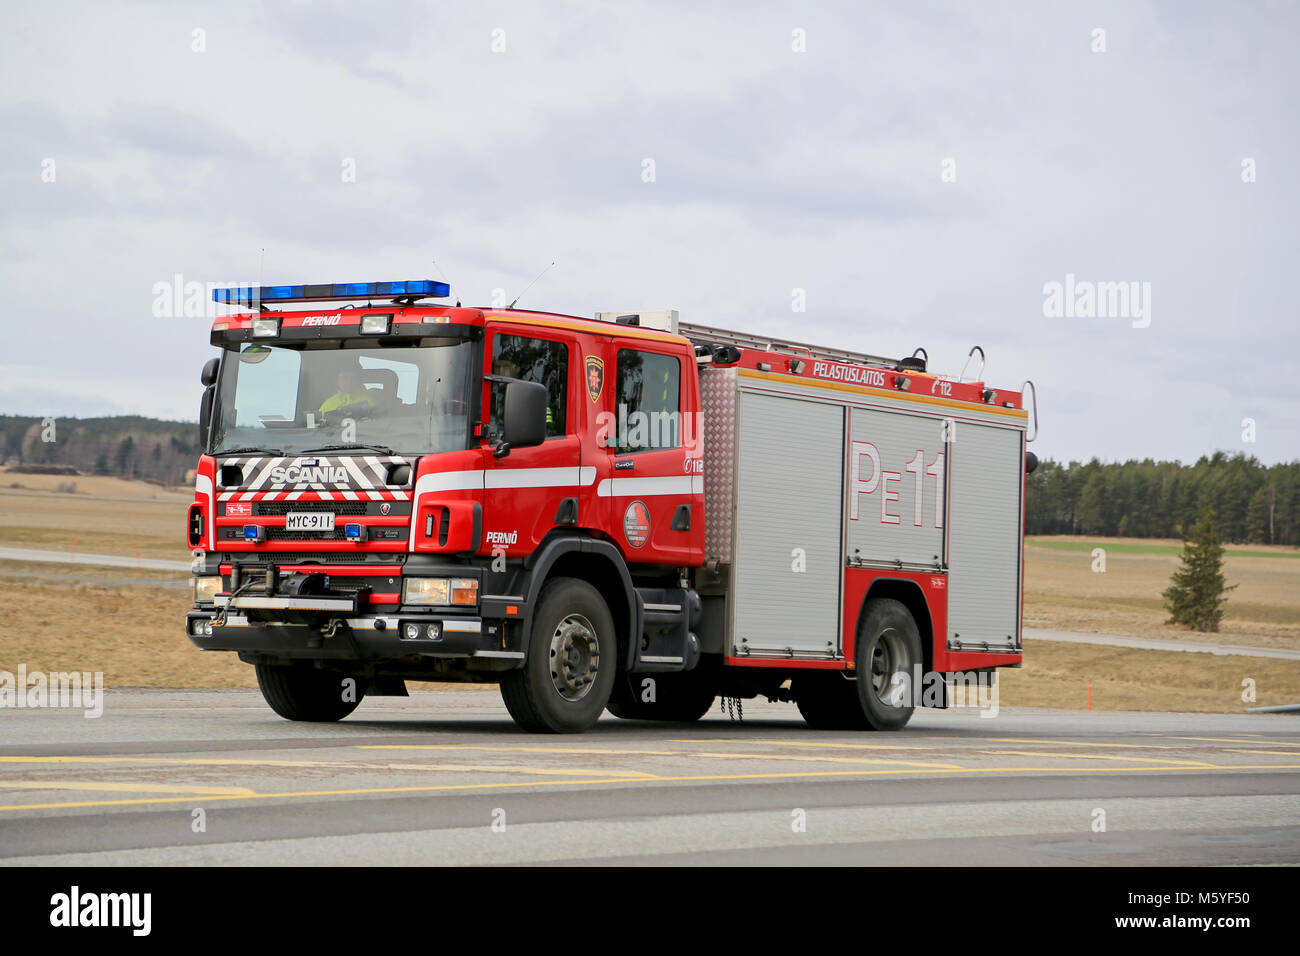 SALO, FINLAND - MARCH 22, 2015: Scania Fire truck on highway 52. A traditional Scania water/rescue tender is typically built in a 4x2 or 4x4 configura Stock Photo